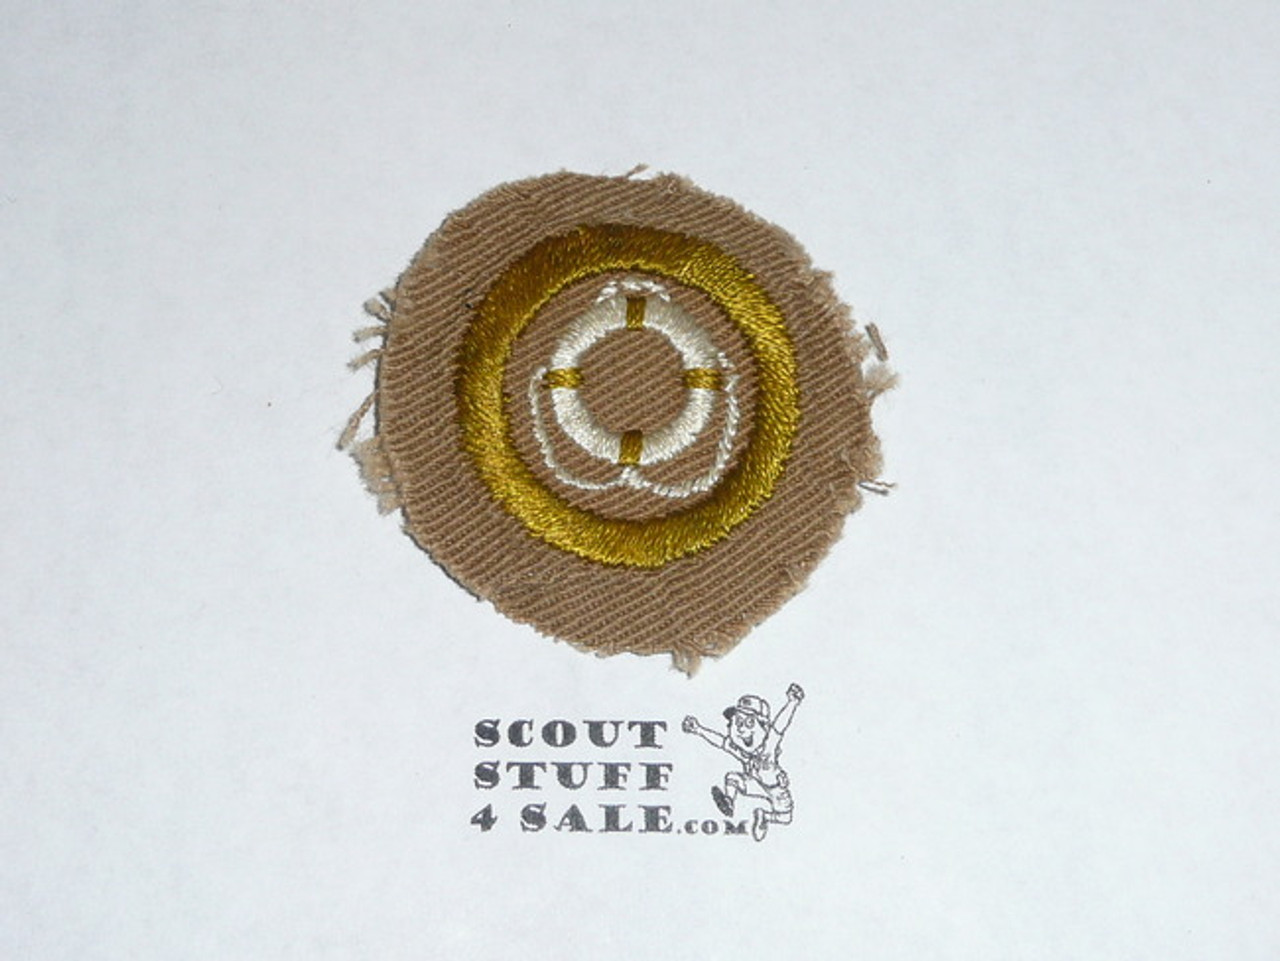 Lifesaving - Type A - Square Tan Merit Badge (1911-1933), Material trimmed and badge used